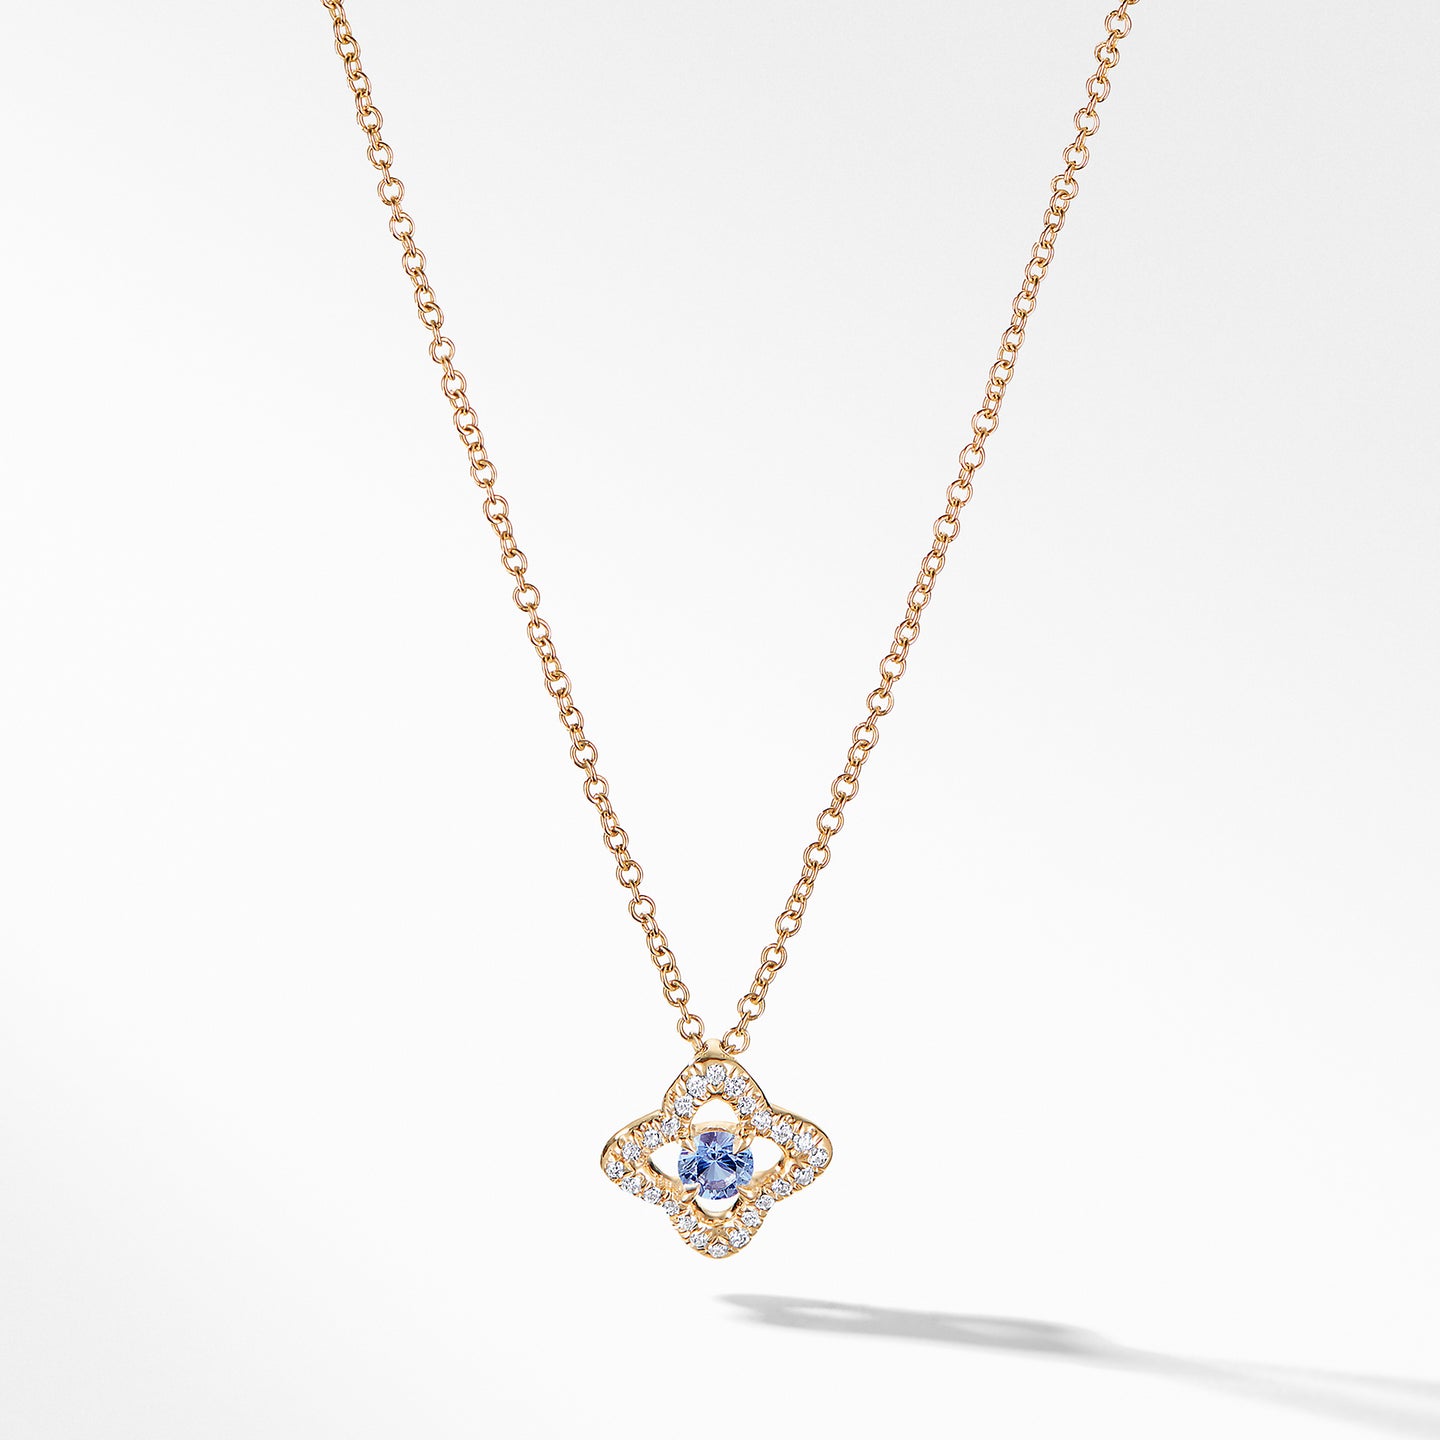 Necklace with Tanzanite and Diamonds in 18K Gold, 18